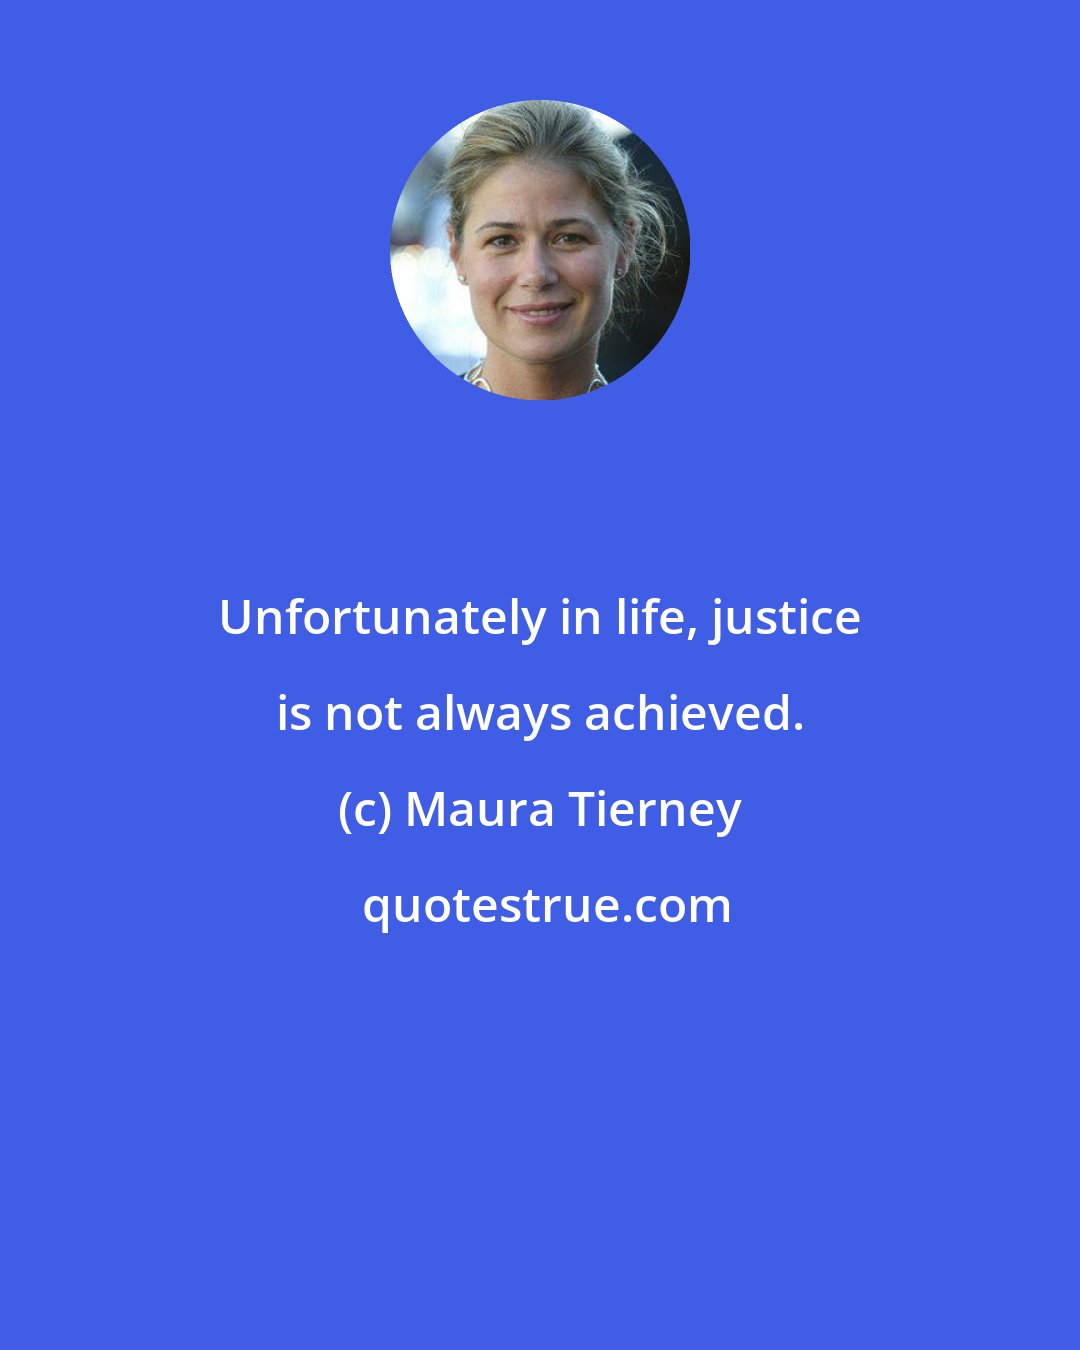 Maura Tierney: Unfortunately in life, justice is not always achieved.